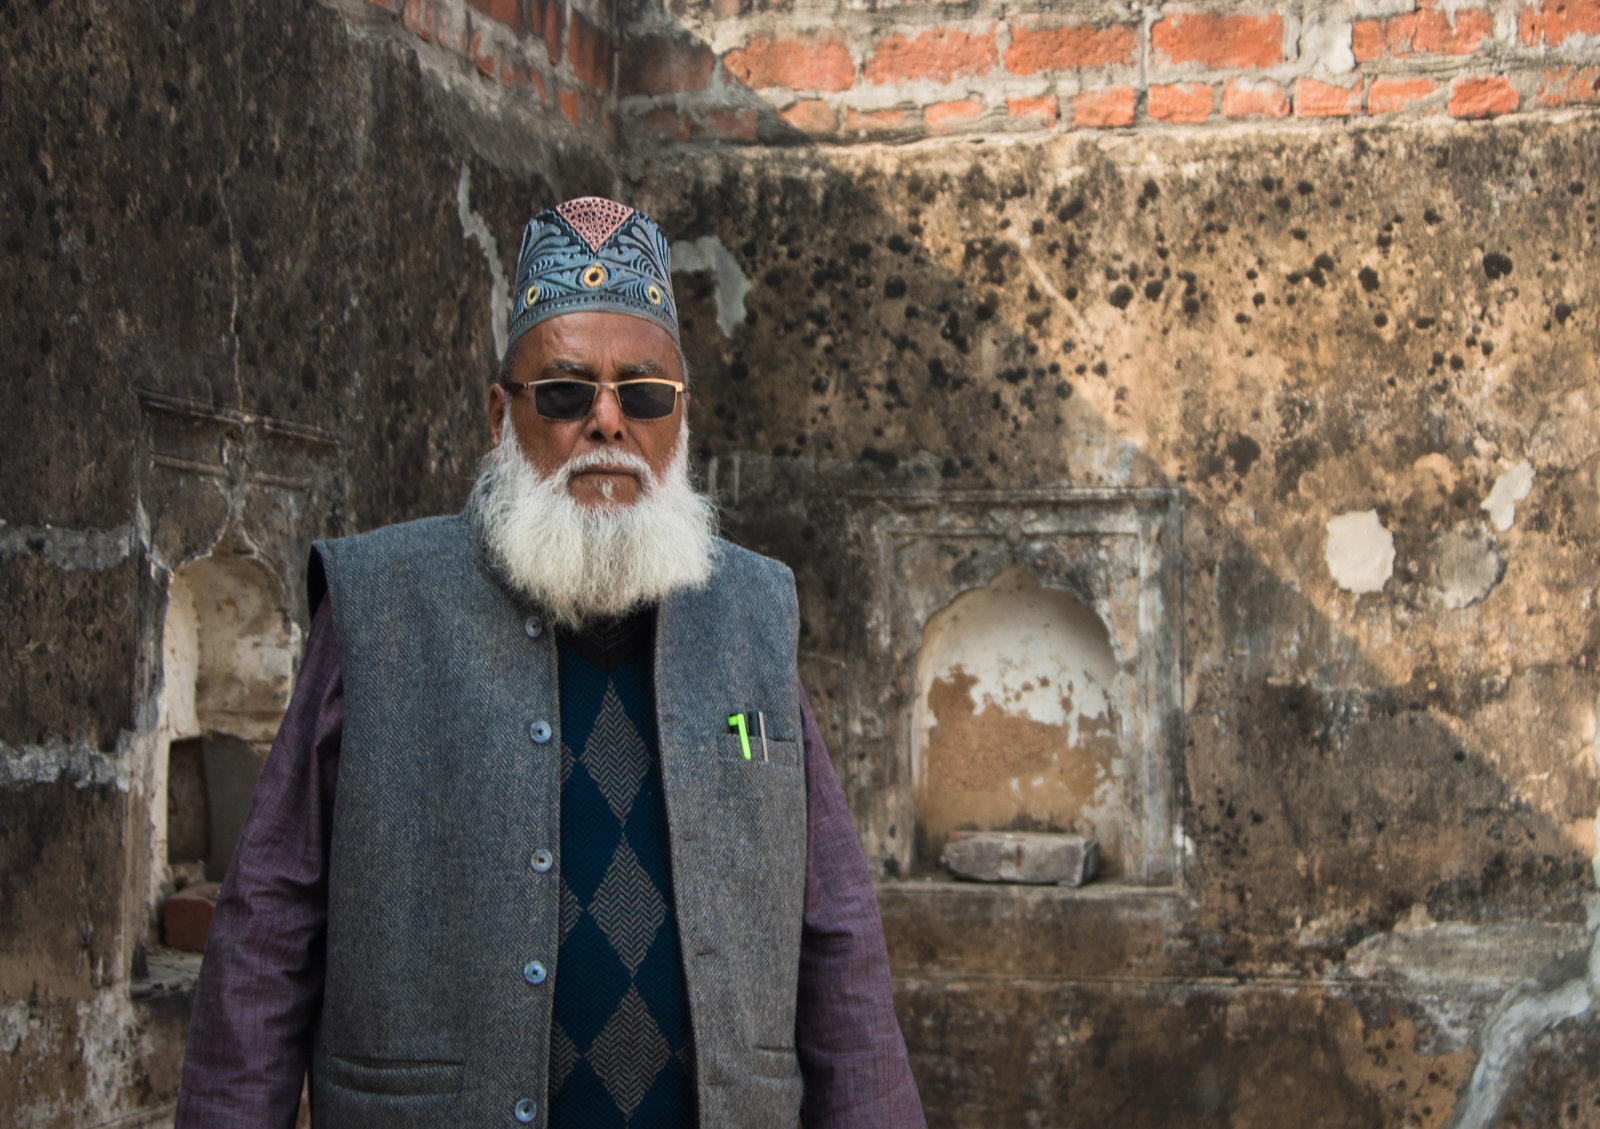  Nearly 27 Years After Hindu Mob Destroyed A Mosque, The Scars In India Remain Deep